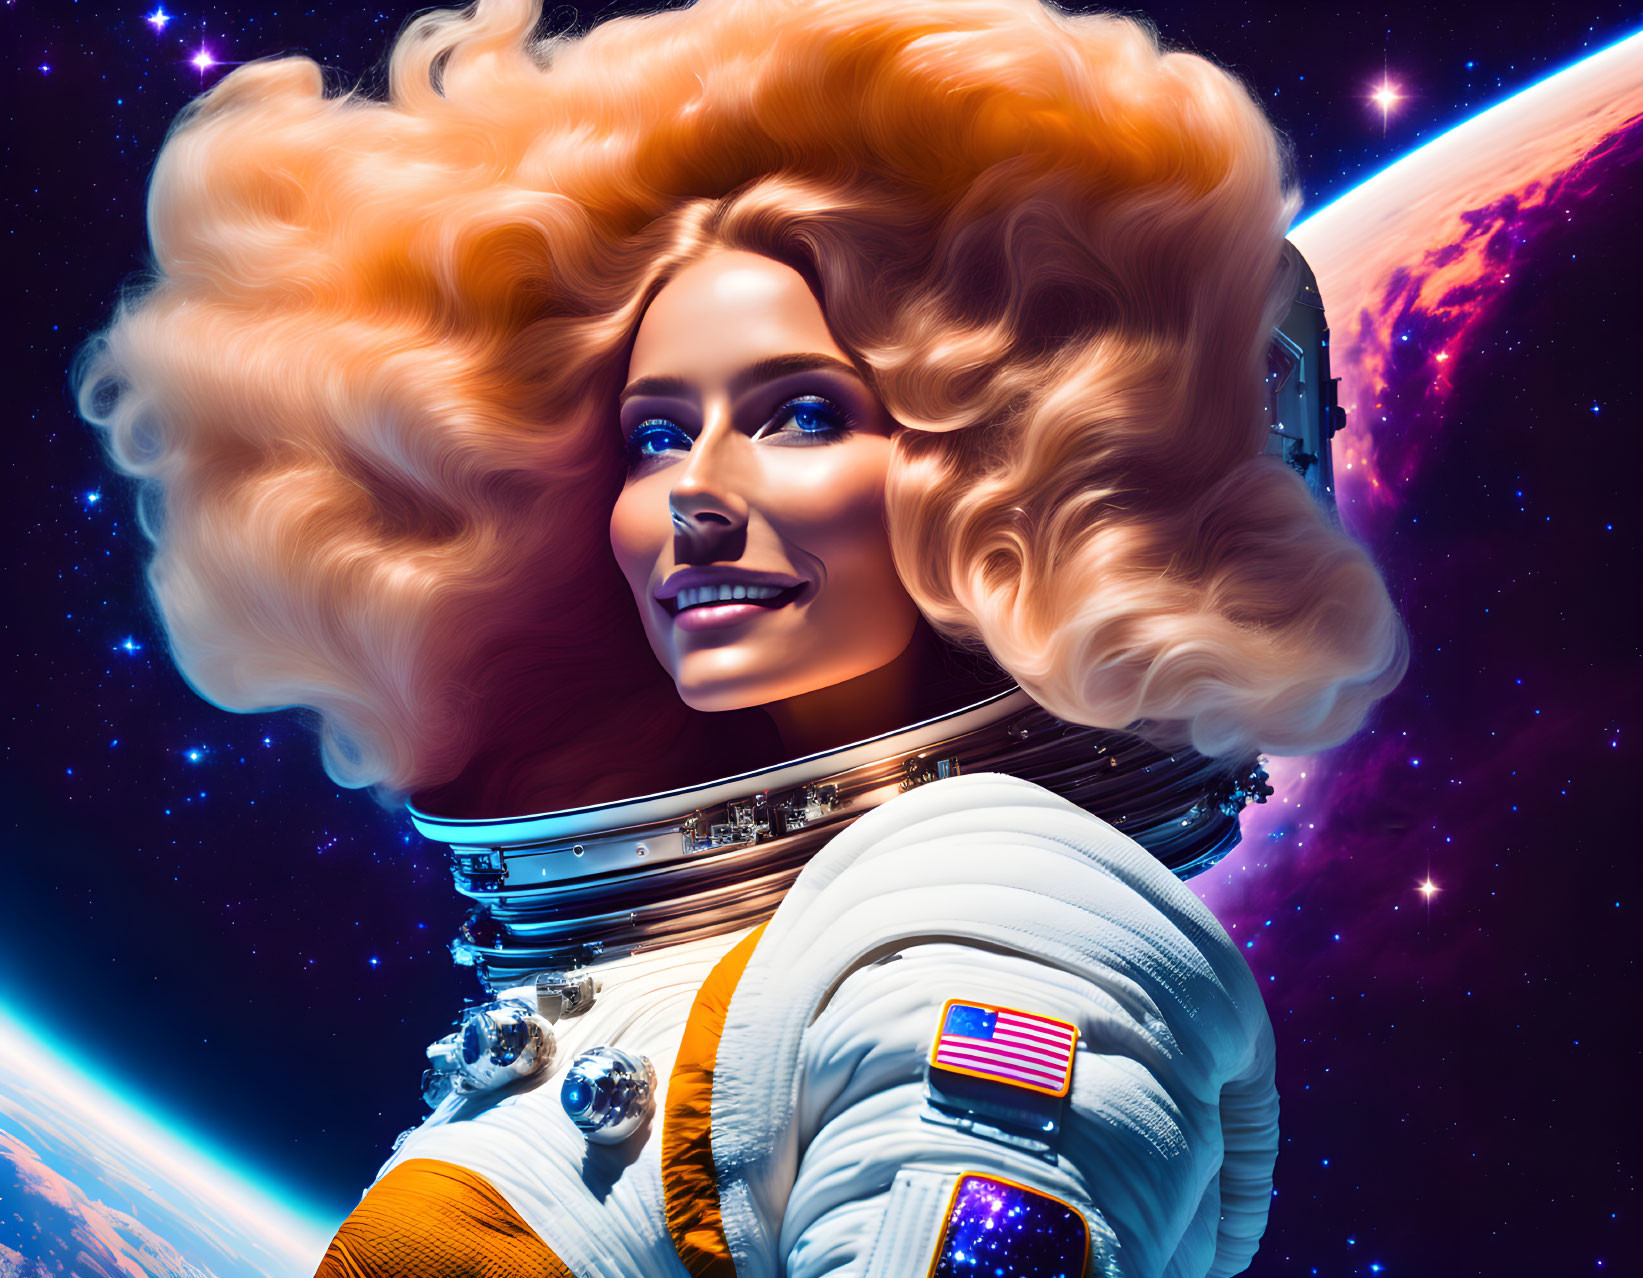 Colorful Astronaut with Orange Hair in Cosmic Scene